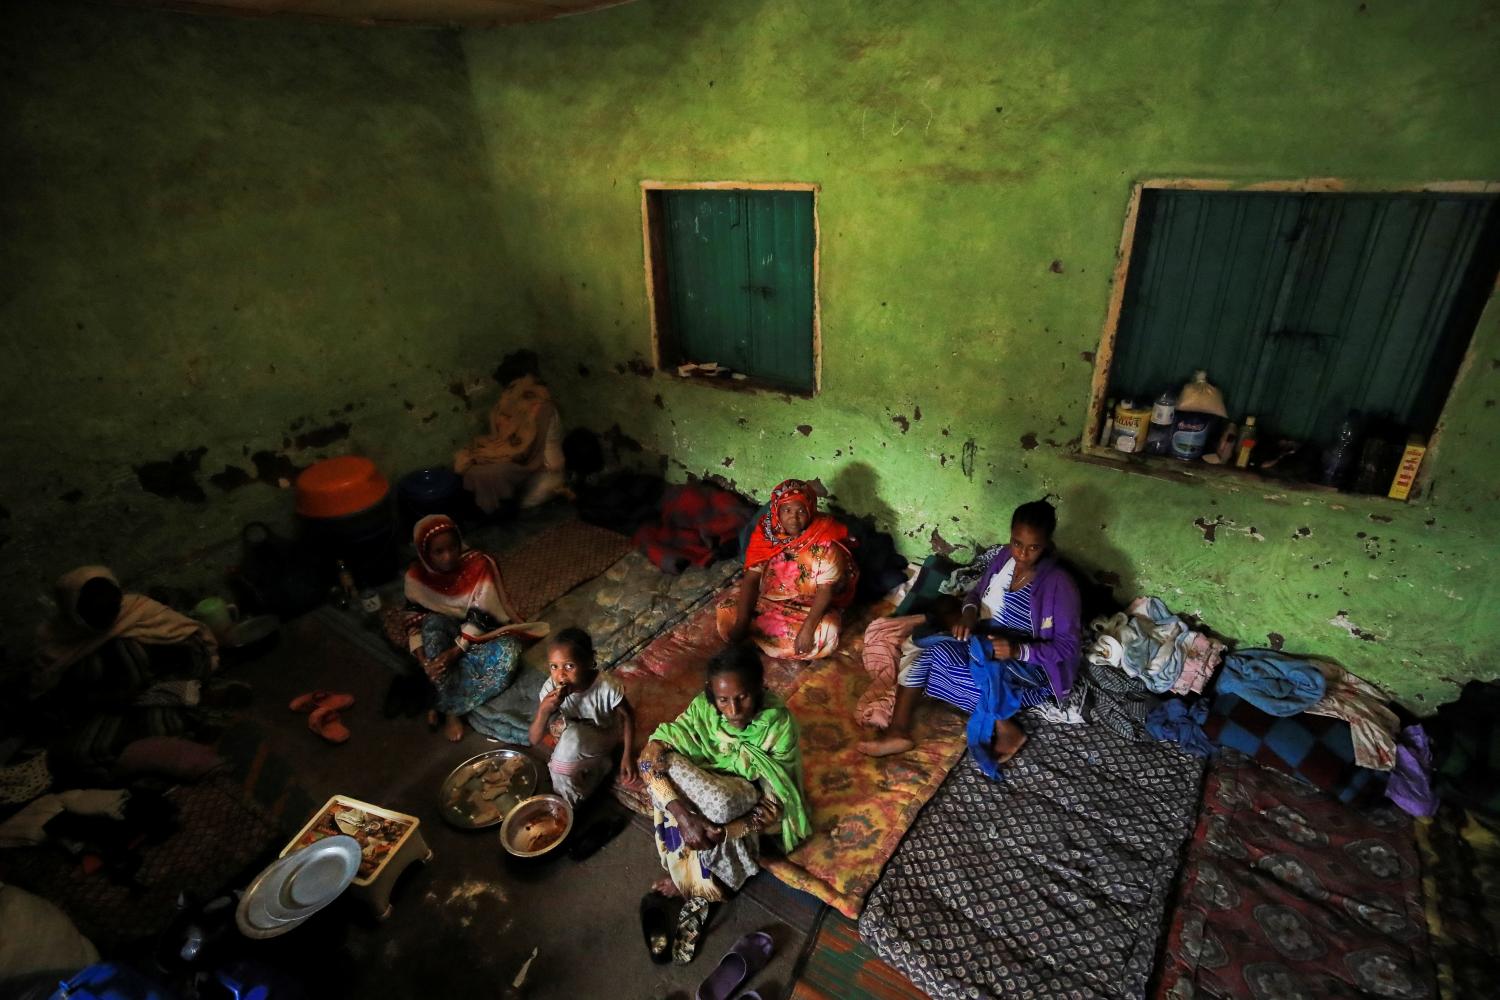 Women sit in their shelter at a camp for the internally displaced due to the fighting between the Ethiopian National Defense Force (ENDF) and the Tigray People's Liberation Front (TPLF) forces in Dessie town, Amhara region, Ethiopia, October 8, 2021. Picture taken October 8, 2021. REUTERS/Tiksa Negeri